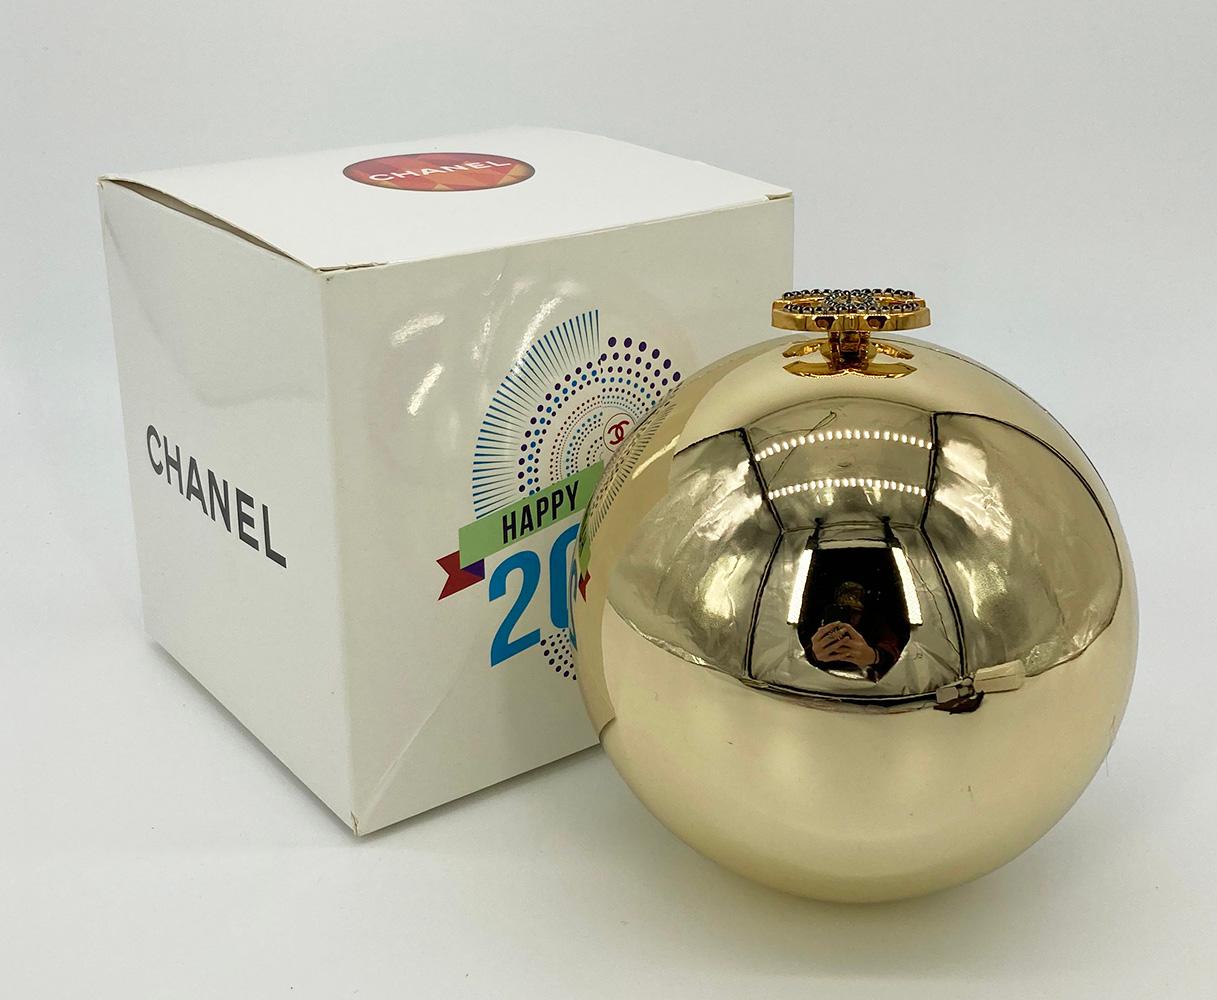 Limited Edition Chanel Beauté Gold Ball Dubai 2016 VIP Gift in fair condition. Mirrored gold exterior in unique ball shape with woven beige canvas shoulder strap with tasseled ends. Black rhinestone CC logo lifting closure opens to a gold pleather